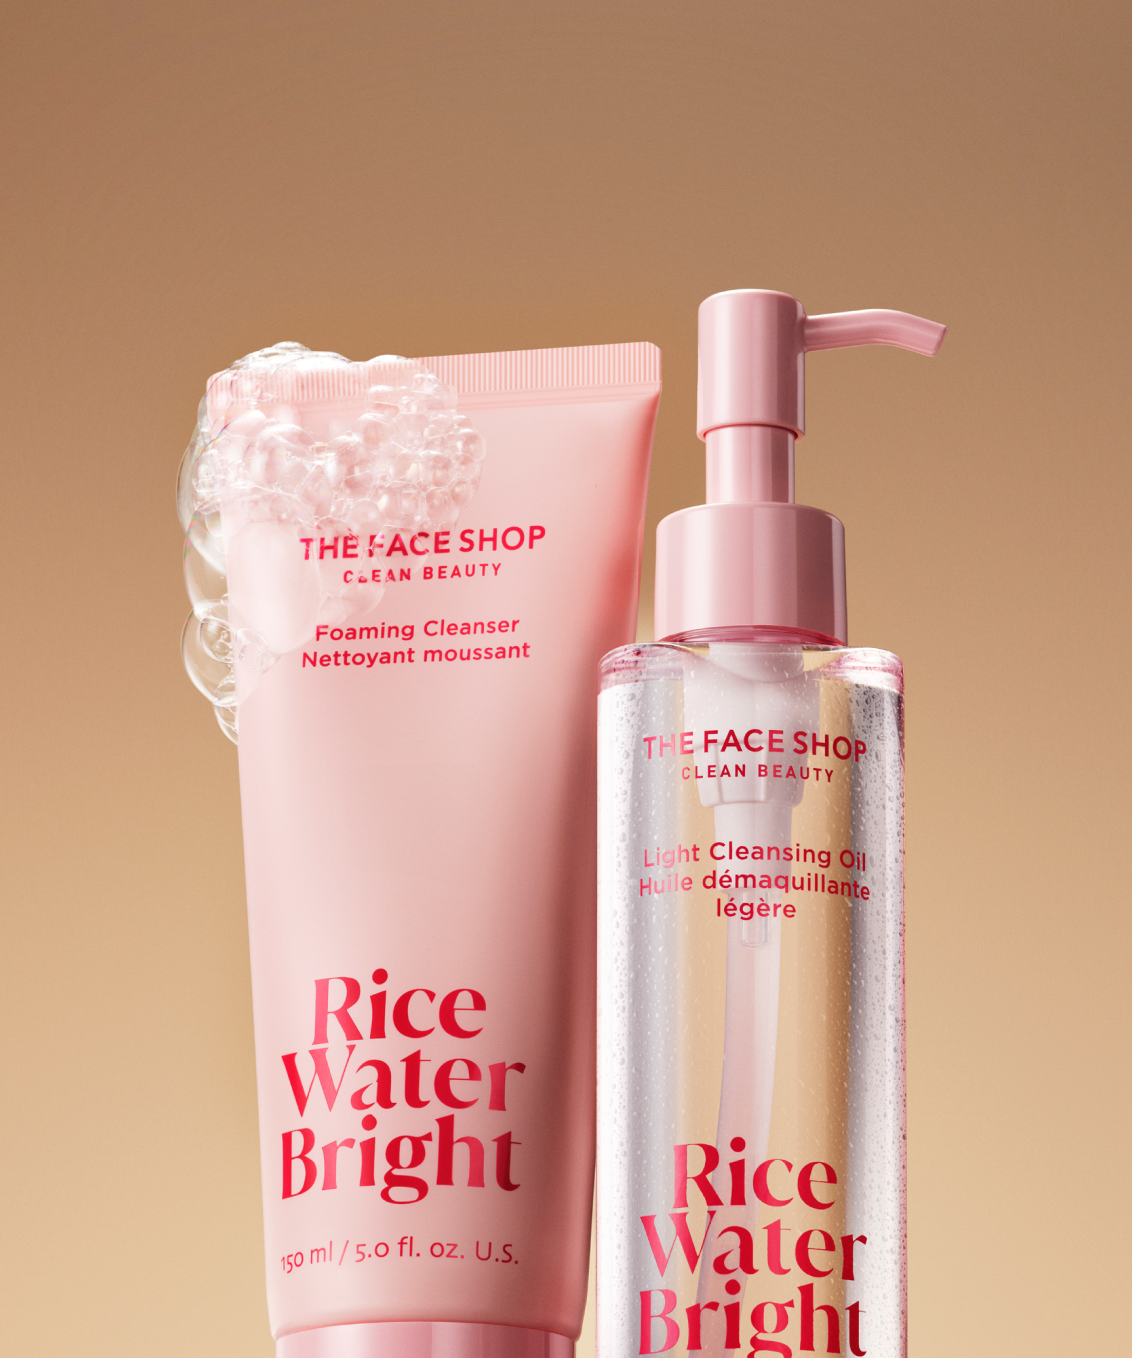 A bottle of The Face Shop Rice Water Bright Foaming Cleanser covered in bubbles next to a bottle of Light Cleansing Oil on a warm beige background.